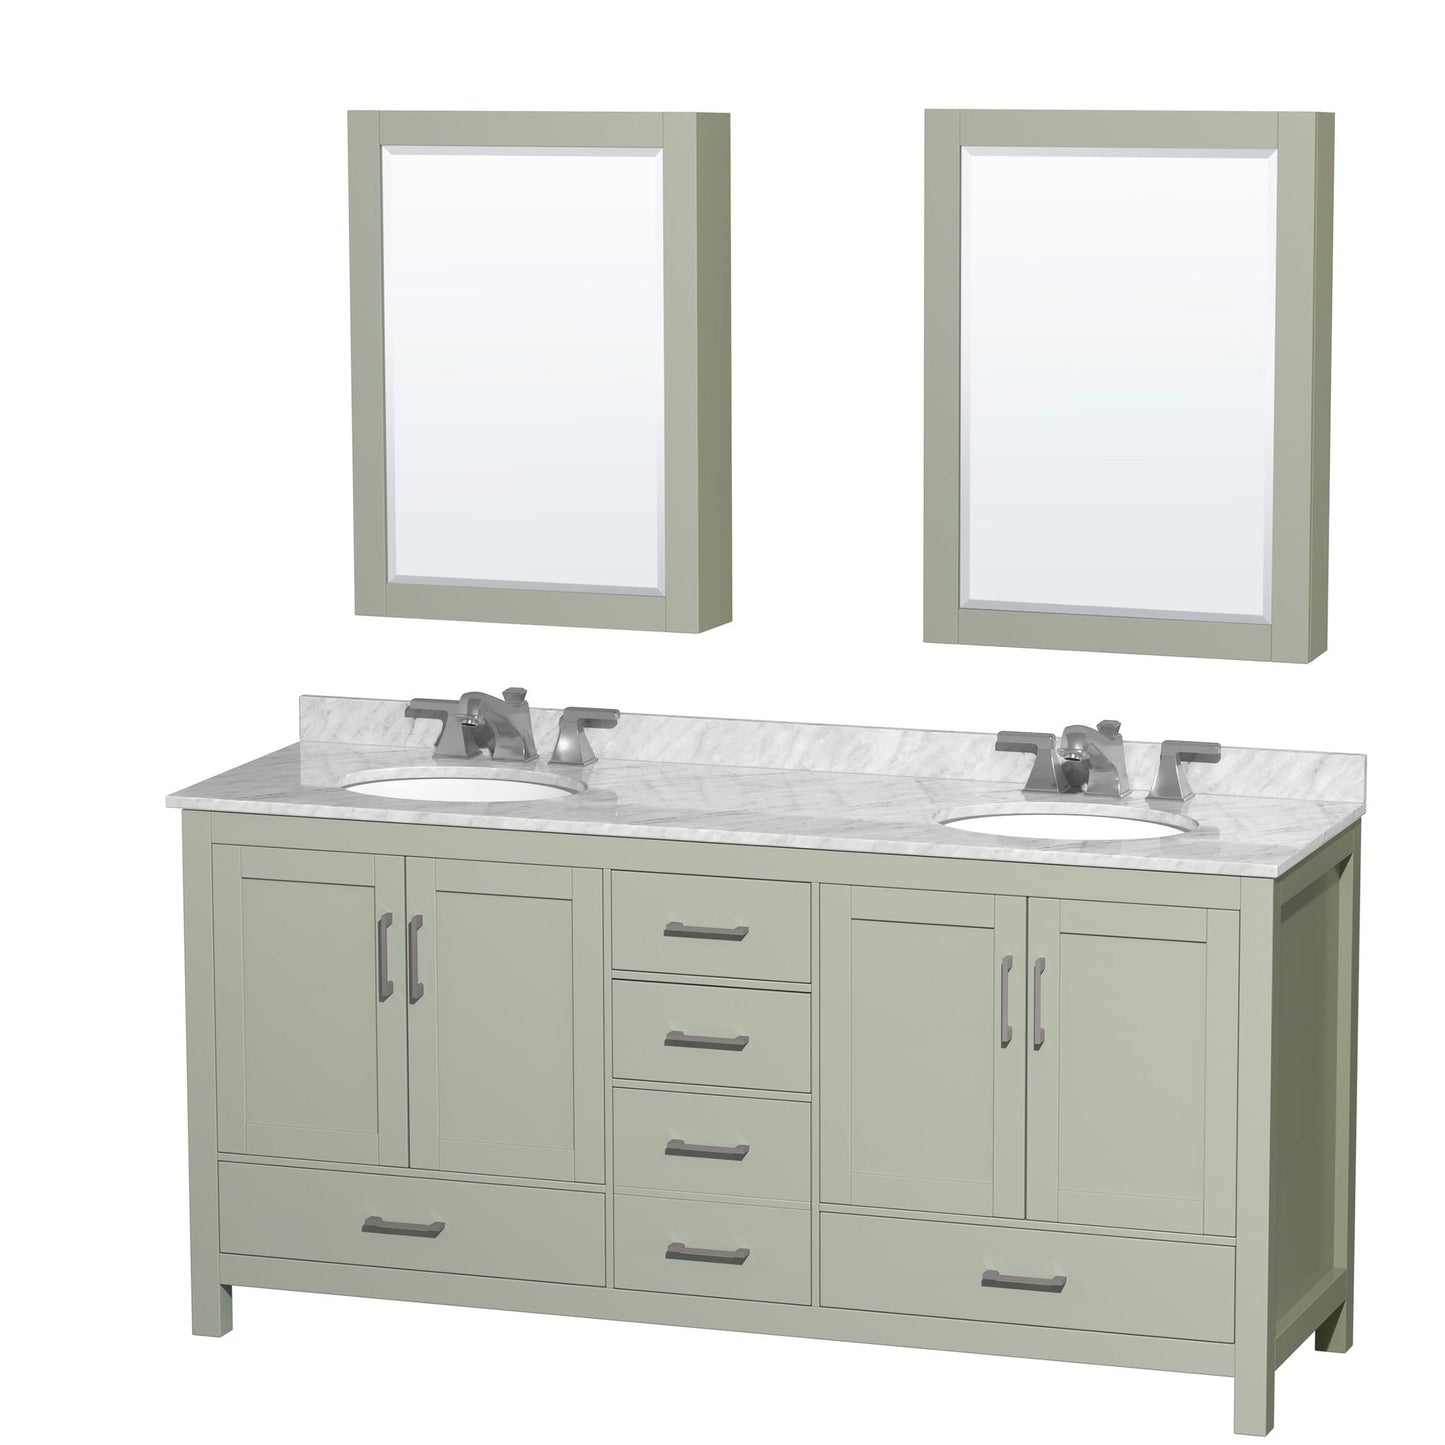 Sheffield 72" Double Bathroom Vanity in Light Green, White Carrara Marble Countertop, Undermount Oval Sinks, Brushed Nickel Trim, Medicine Cabinets